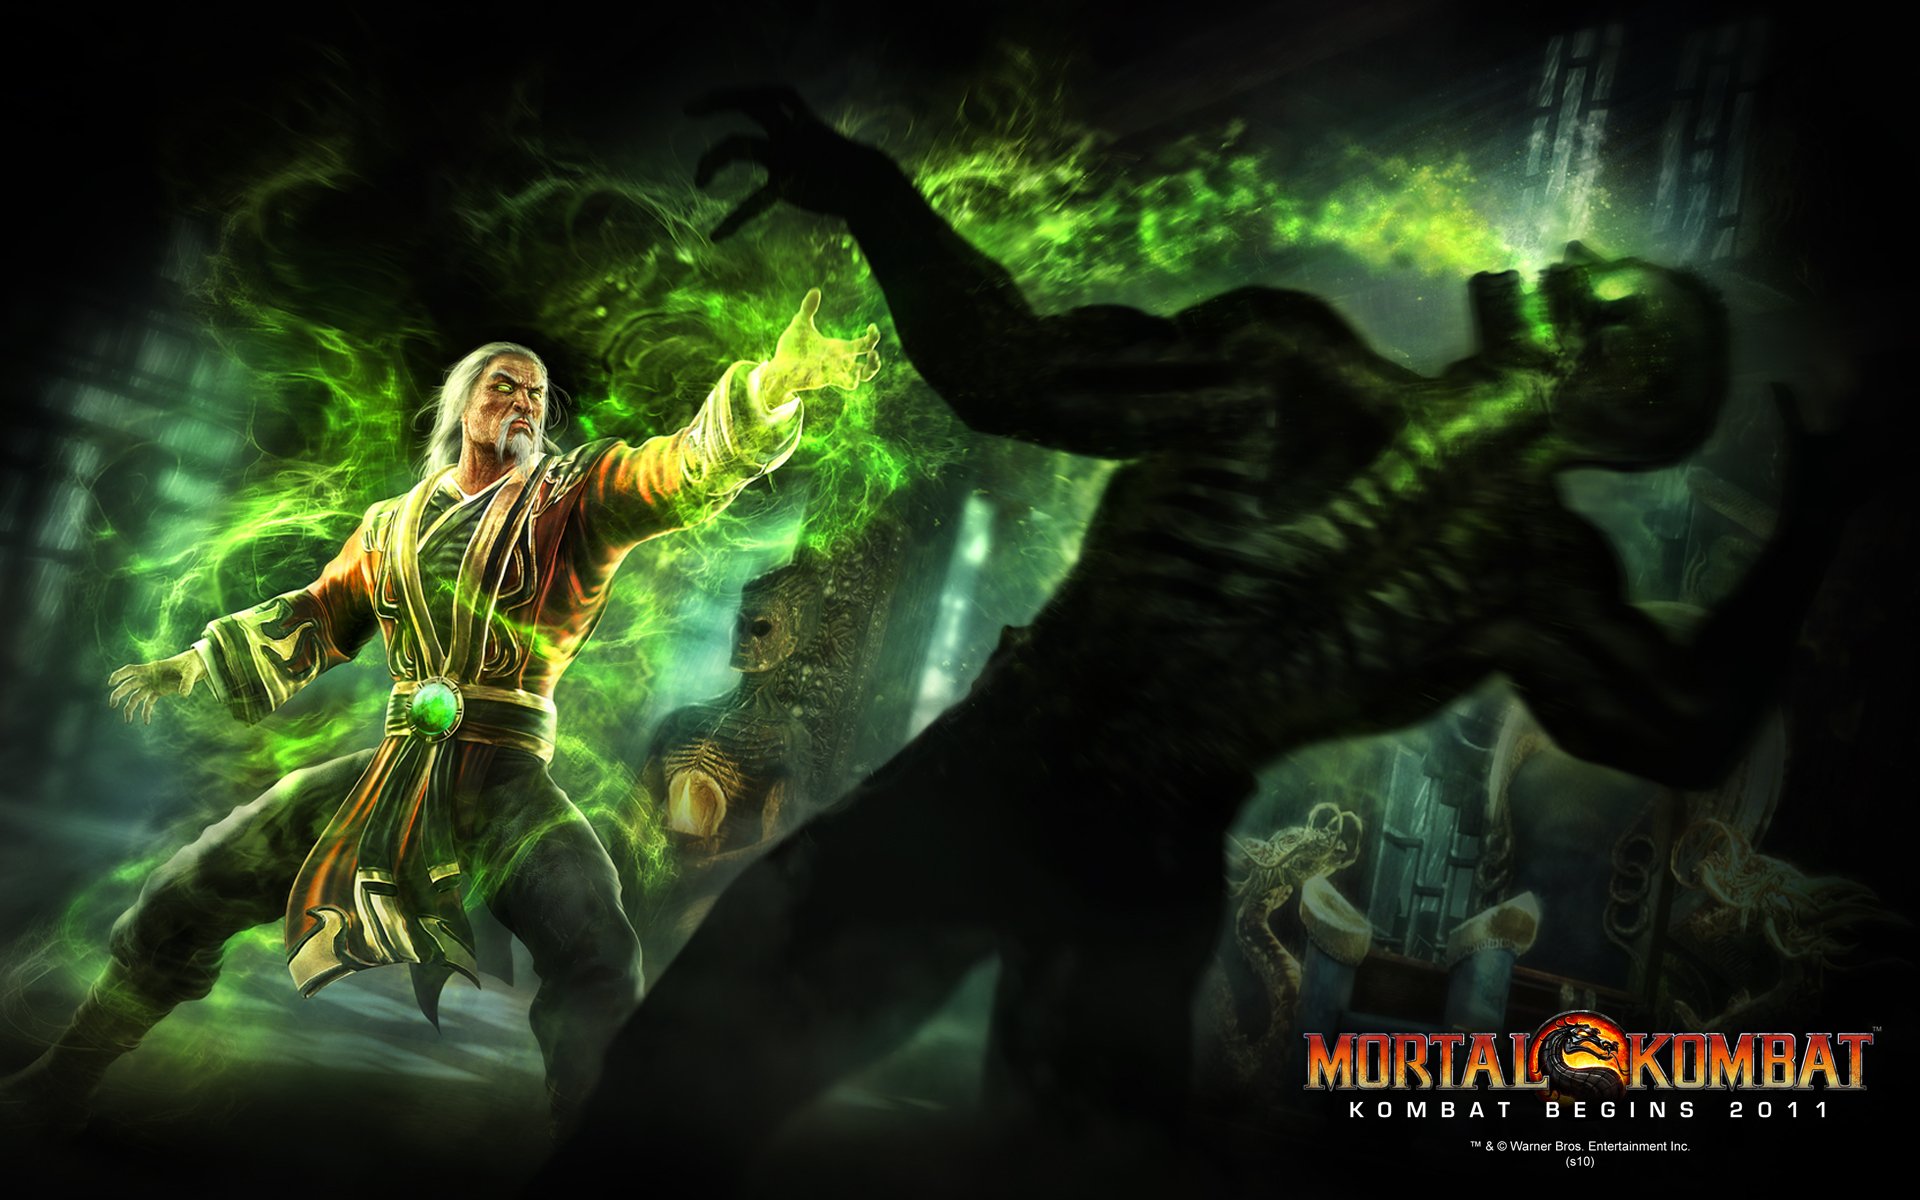 FDMK Monday: Another Shang Tsung Wallpaper Released